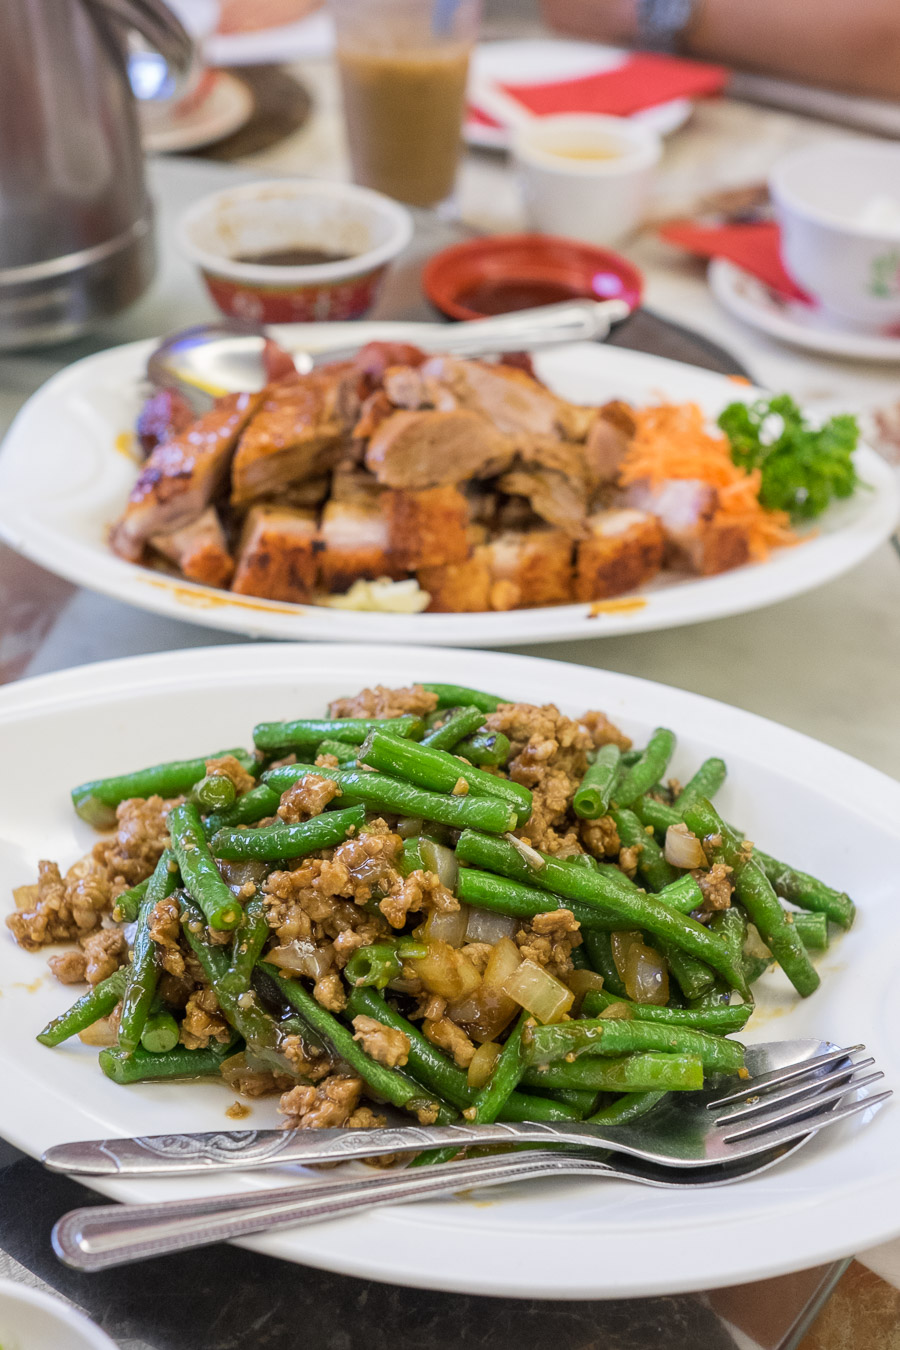 Green beans with pork mince (my favourite)